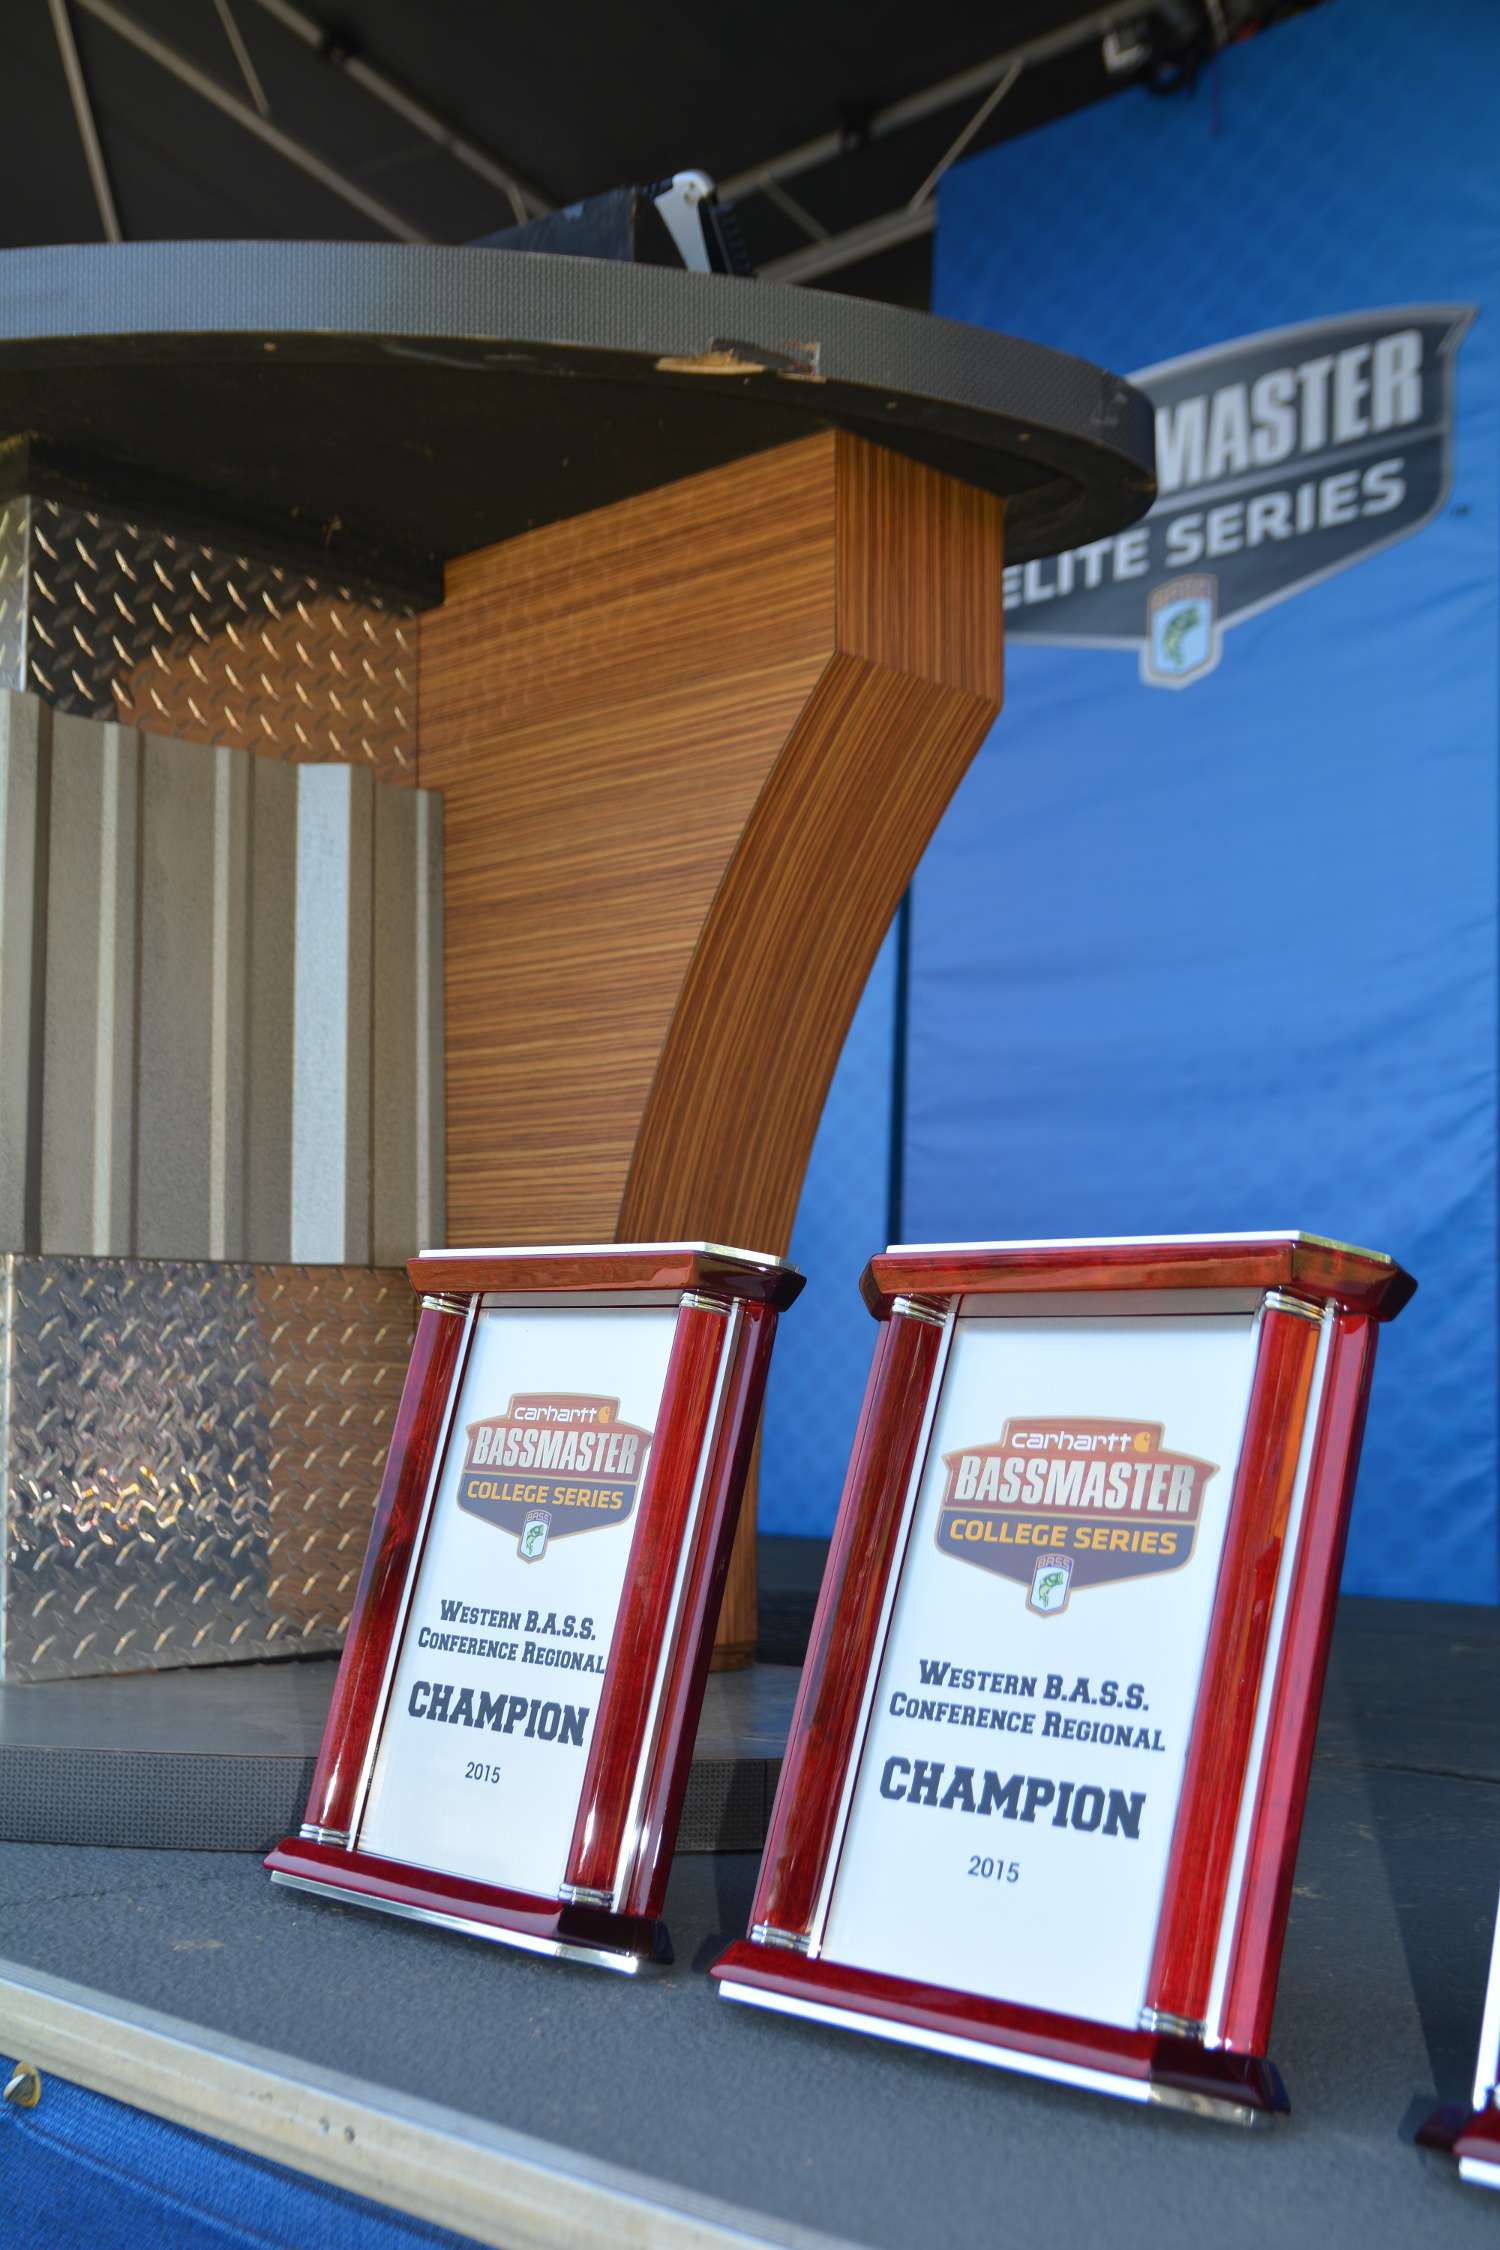 The winners' plaques sat on the Elite Series stage.